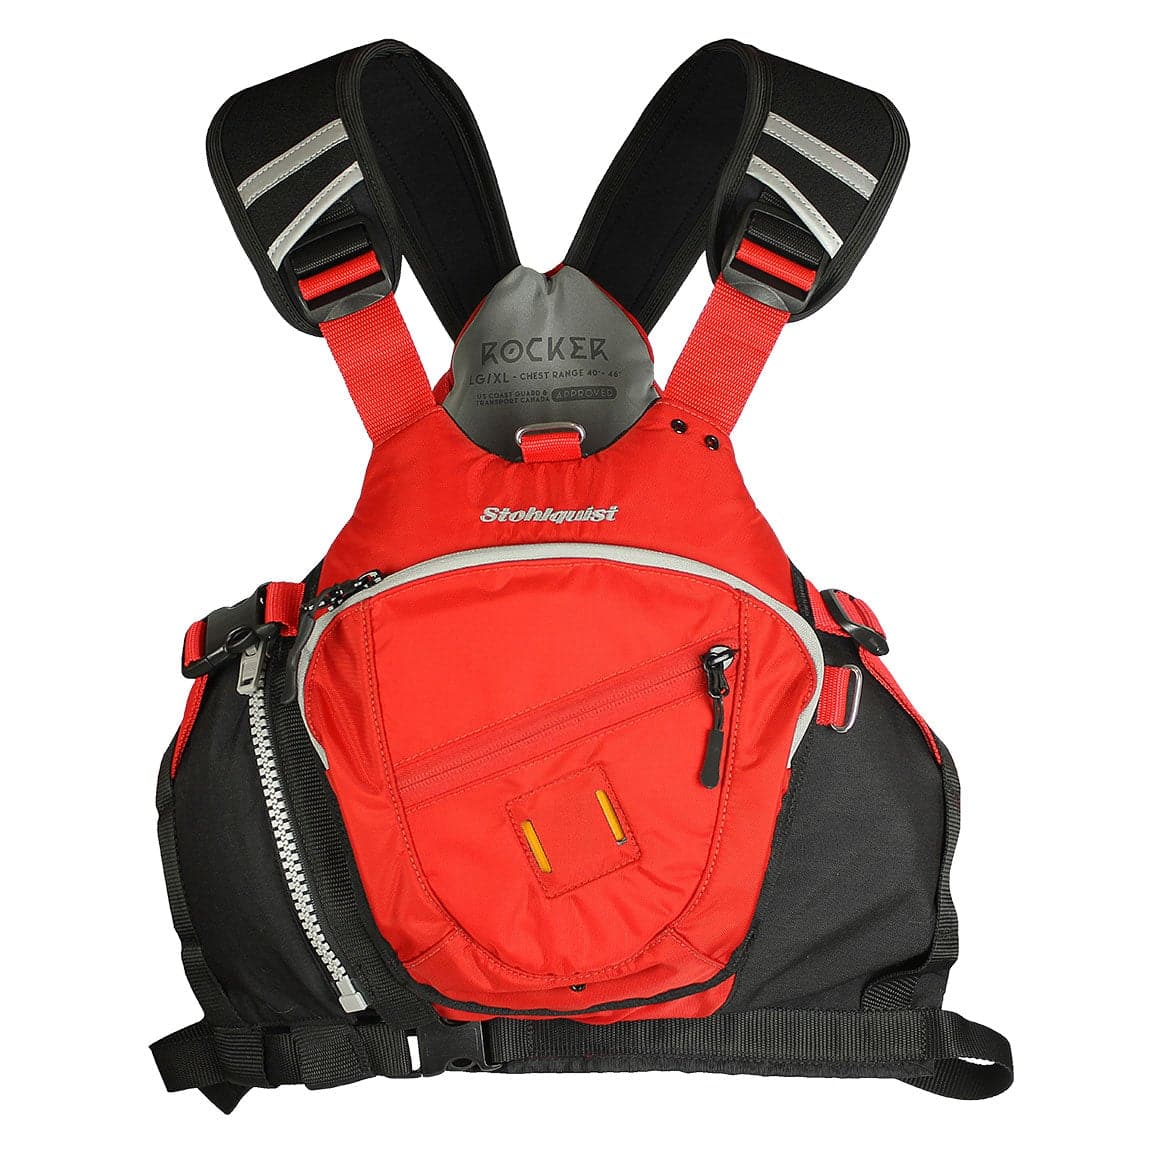 Featuring the Rocker PFD gift for kayaker, gift for rafter, men's pfd manufactured by Stohlquist shown here from a second angle.